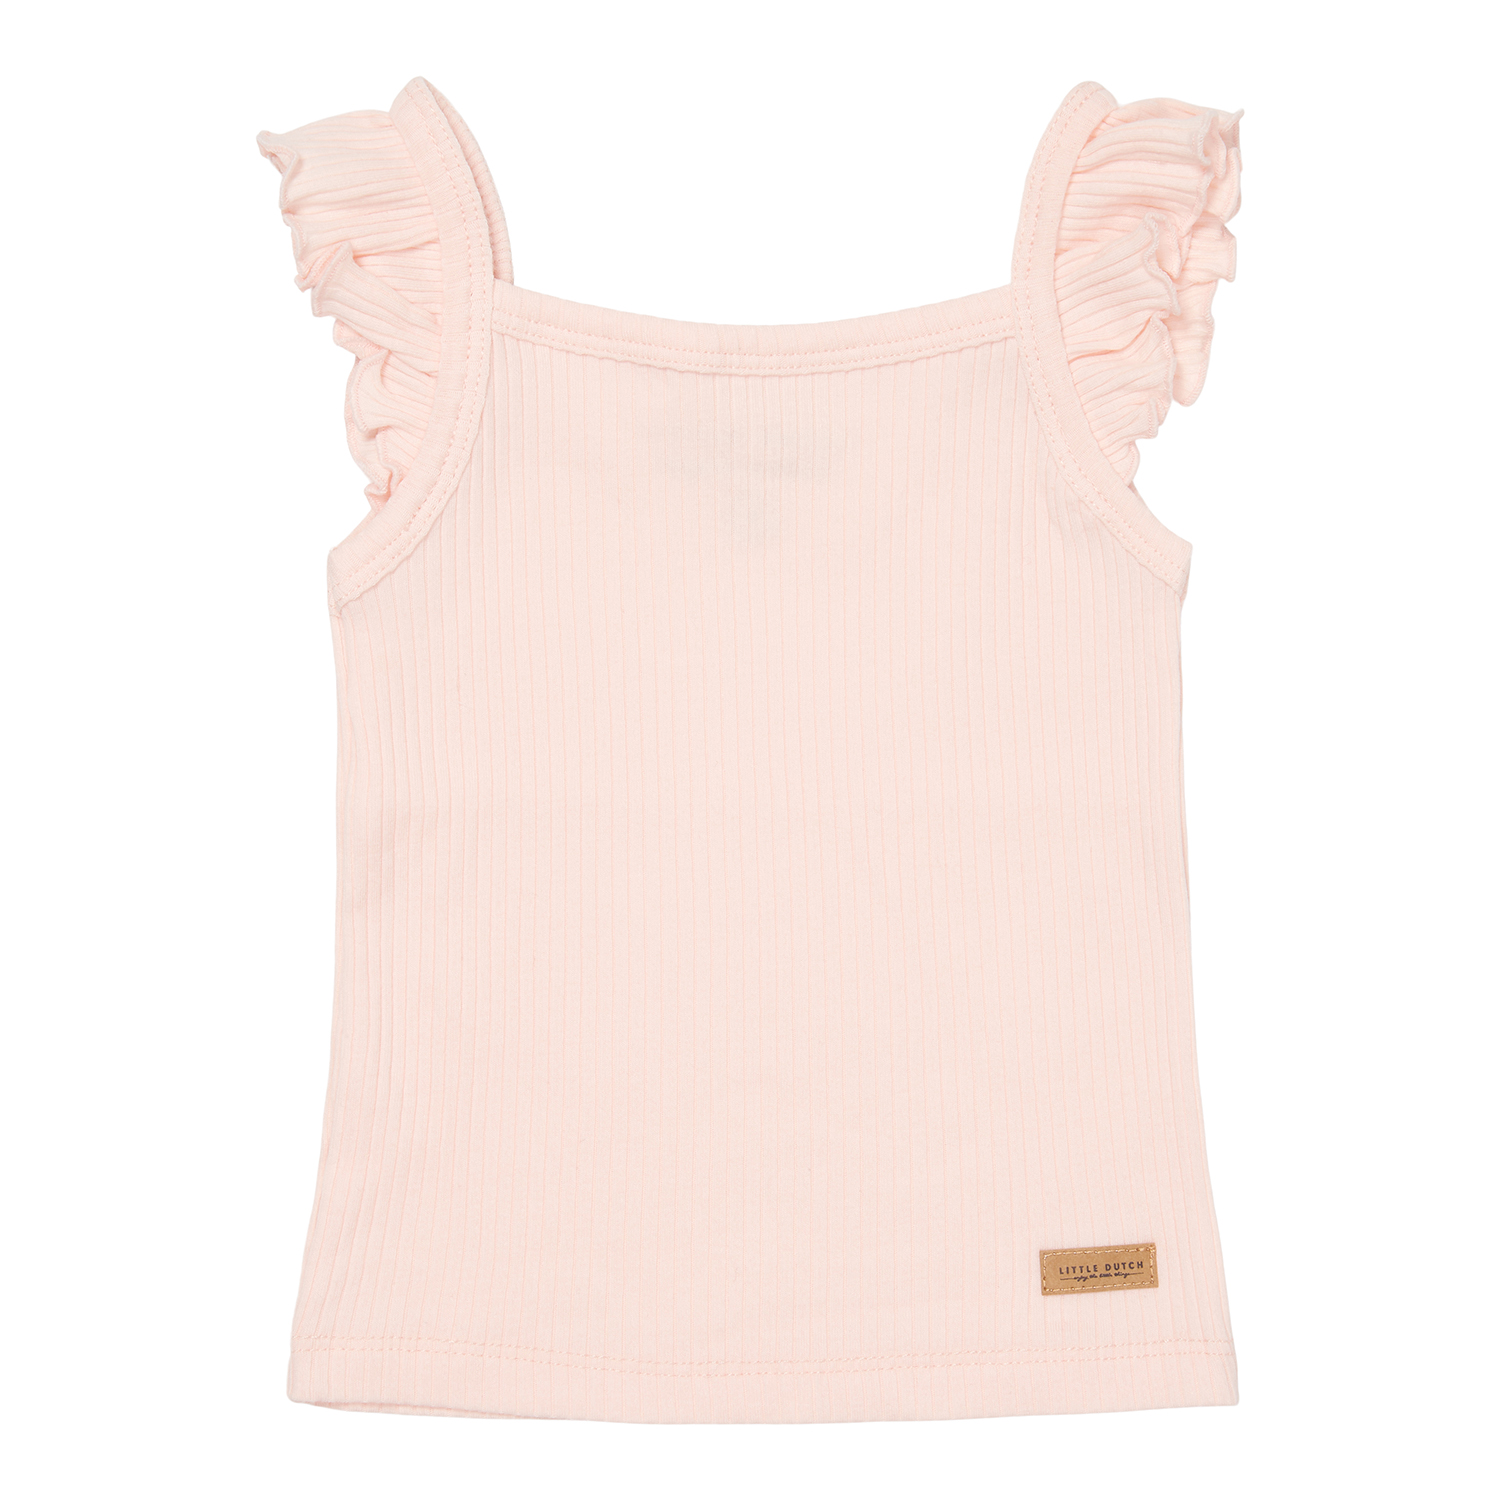 Top mit Volants Rippe Pure soft pink (Gr. 86)